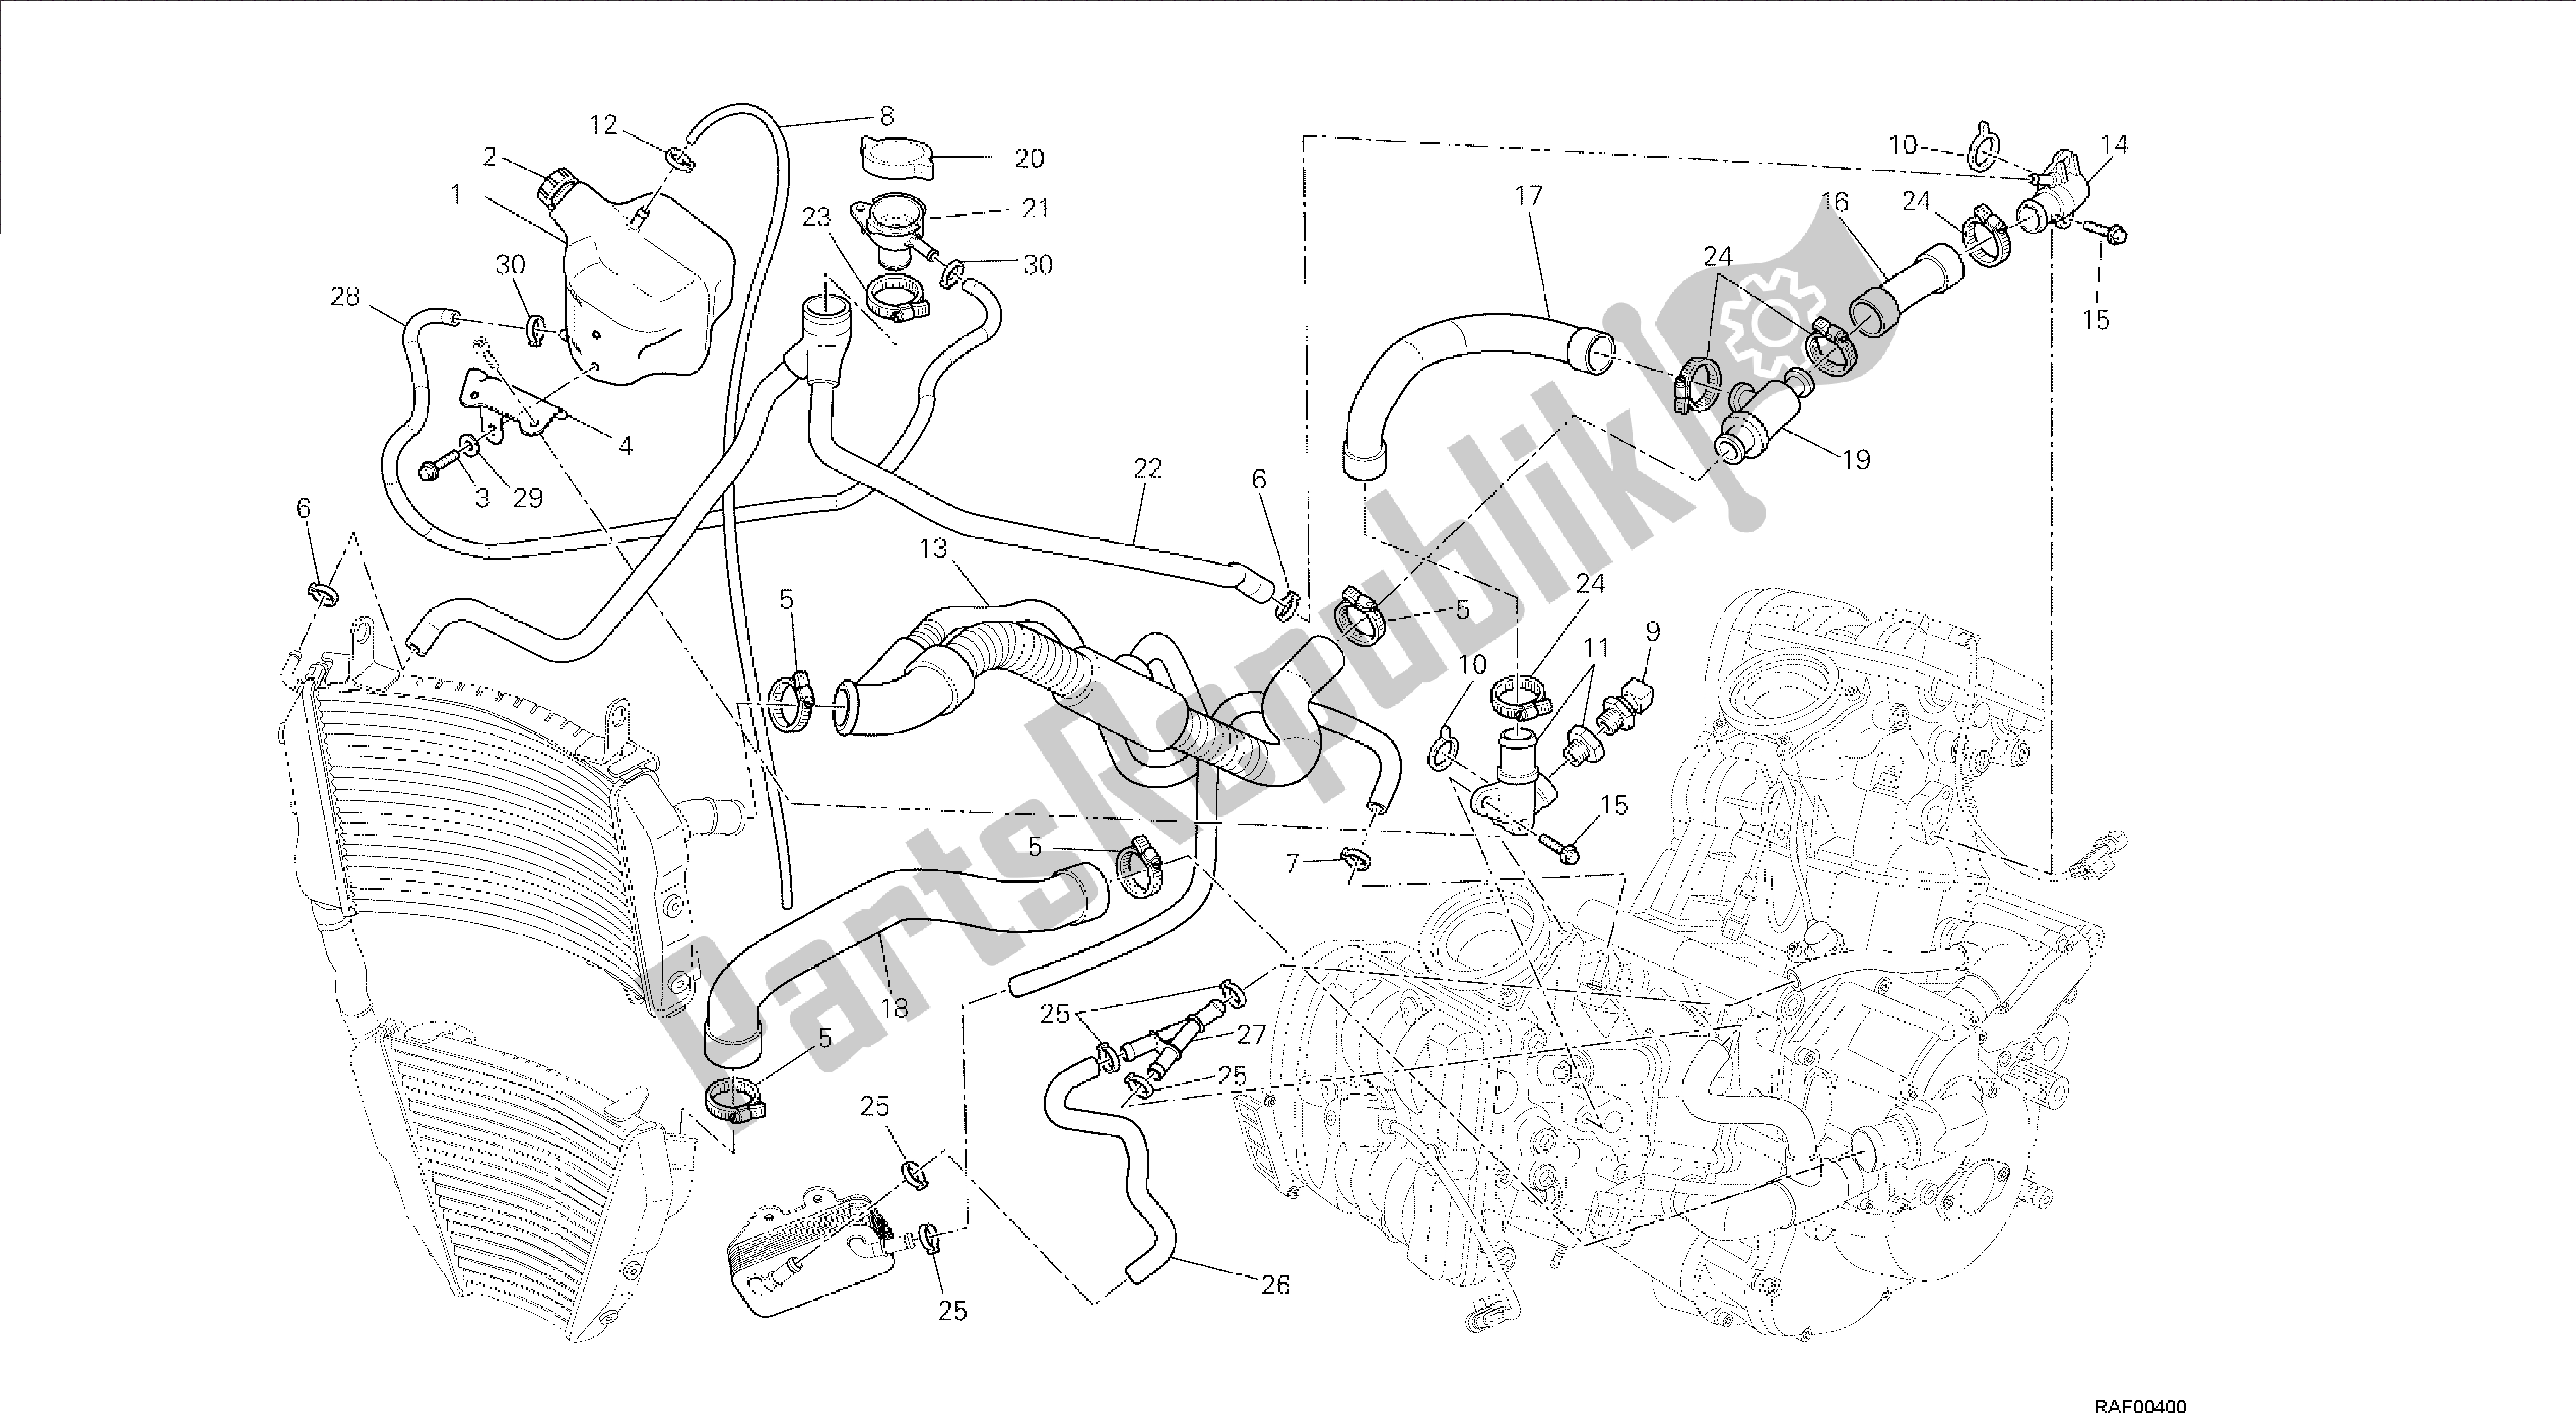 All parts for the Drawing 031 - Cooling Circuit [mod:f848;xst:aus,bra,chn,eur,fra,jap,tha]group Frame of the Ducati Streetfighter 848 2014